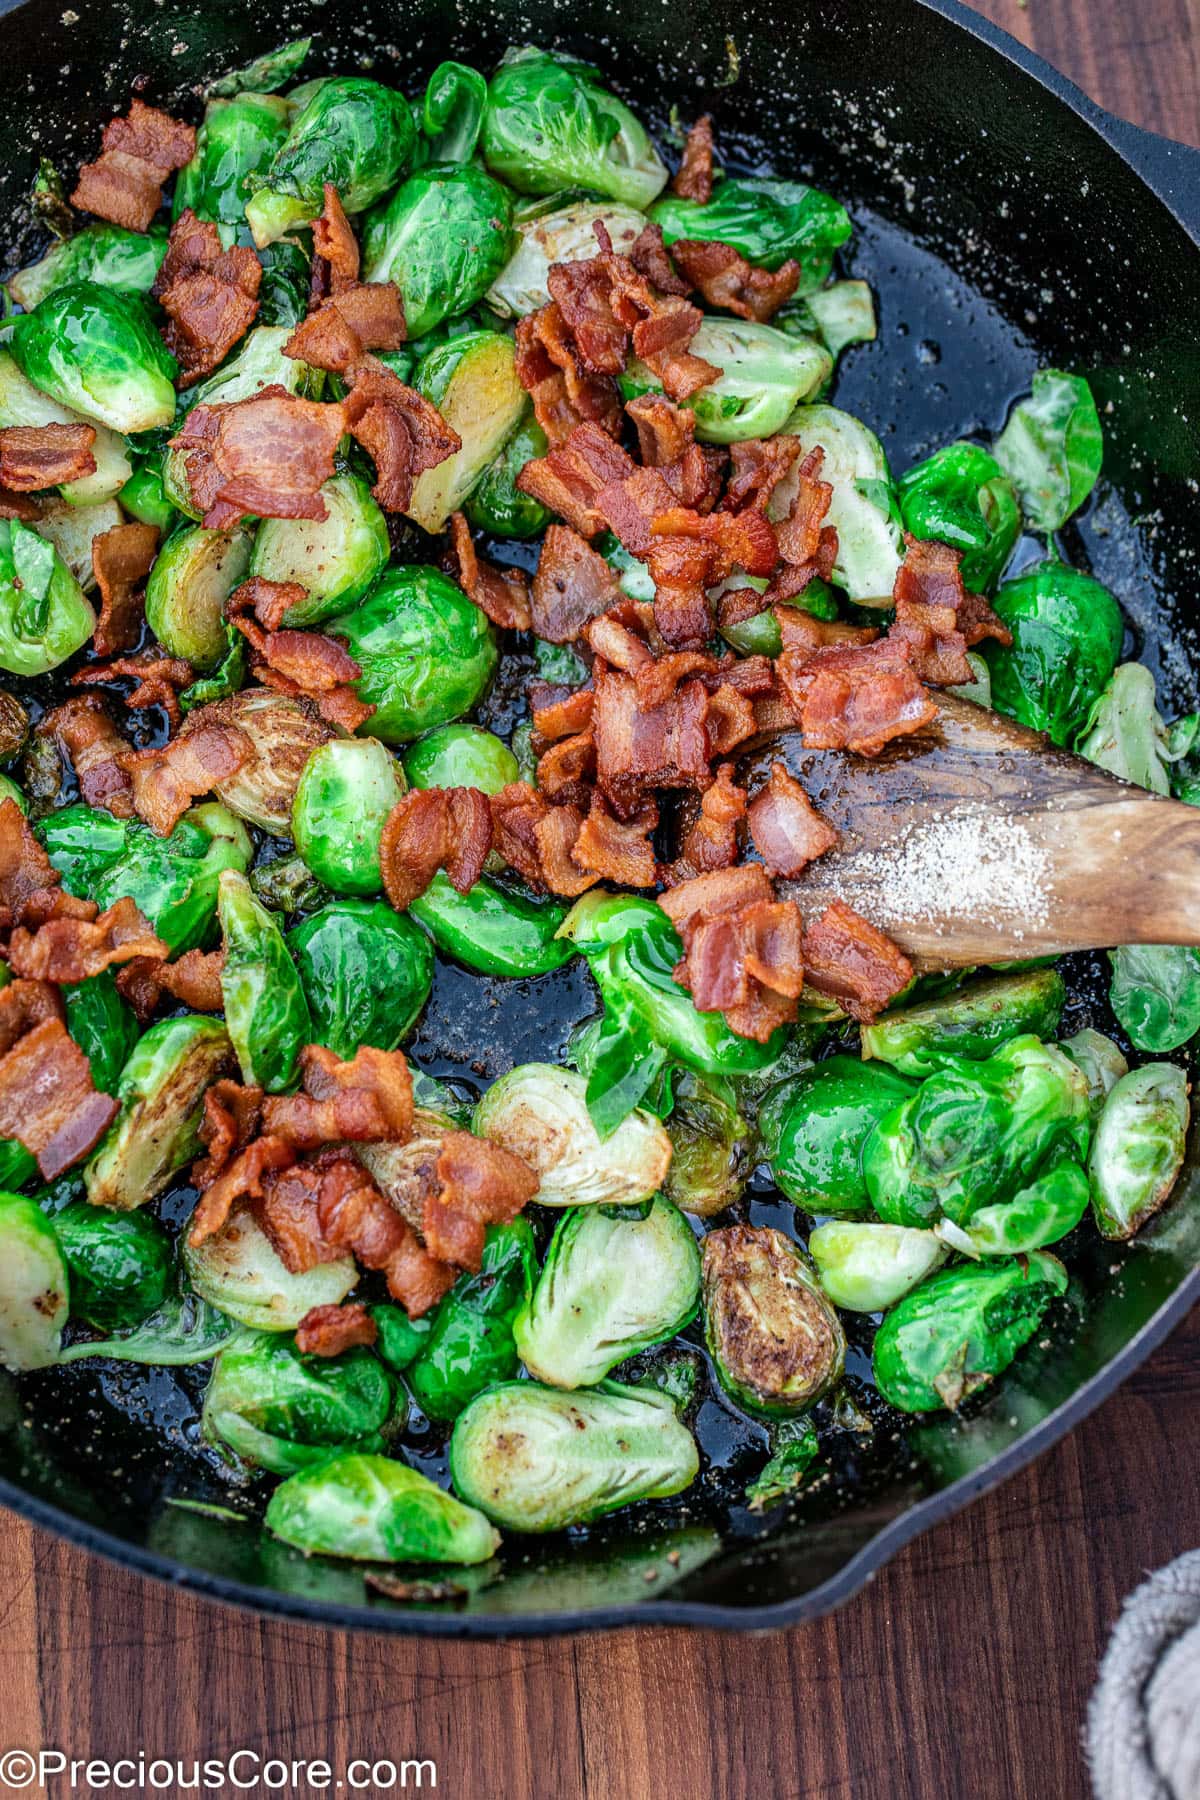 Pan fried Brussels sprouts in a skillet with bacon.